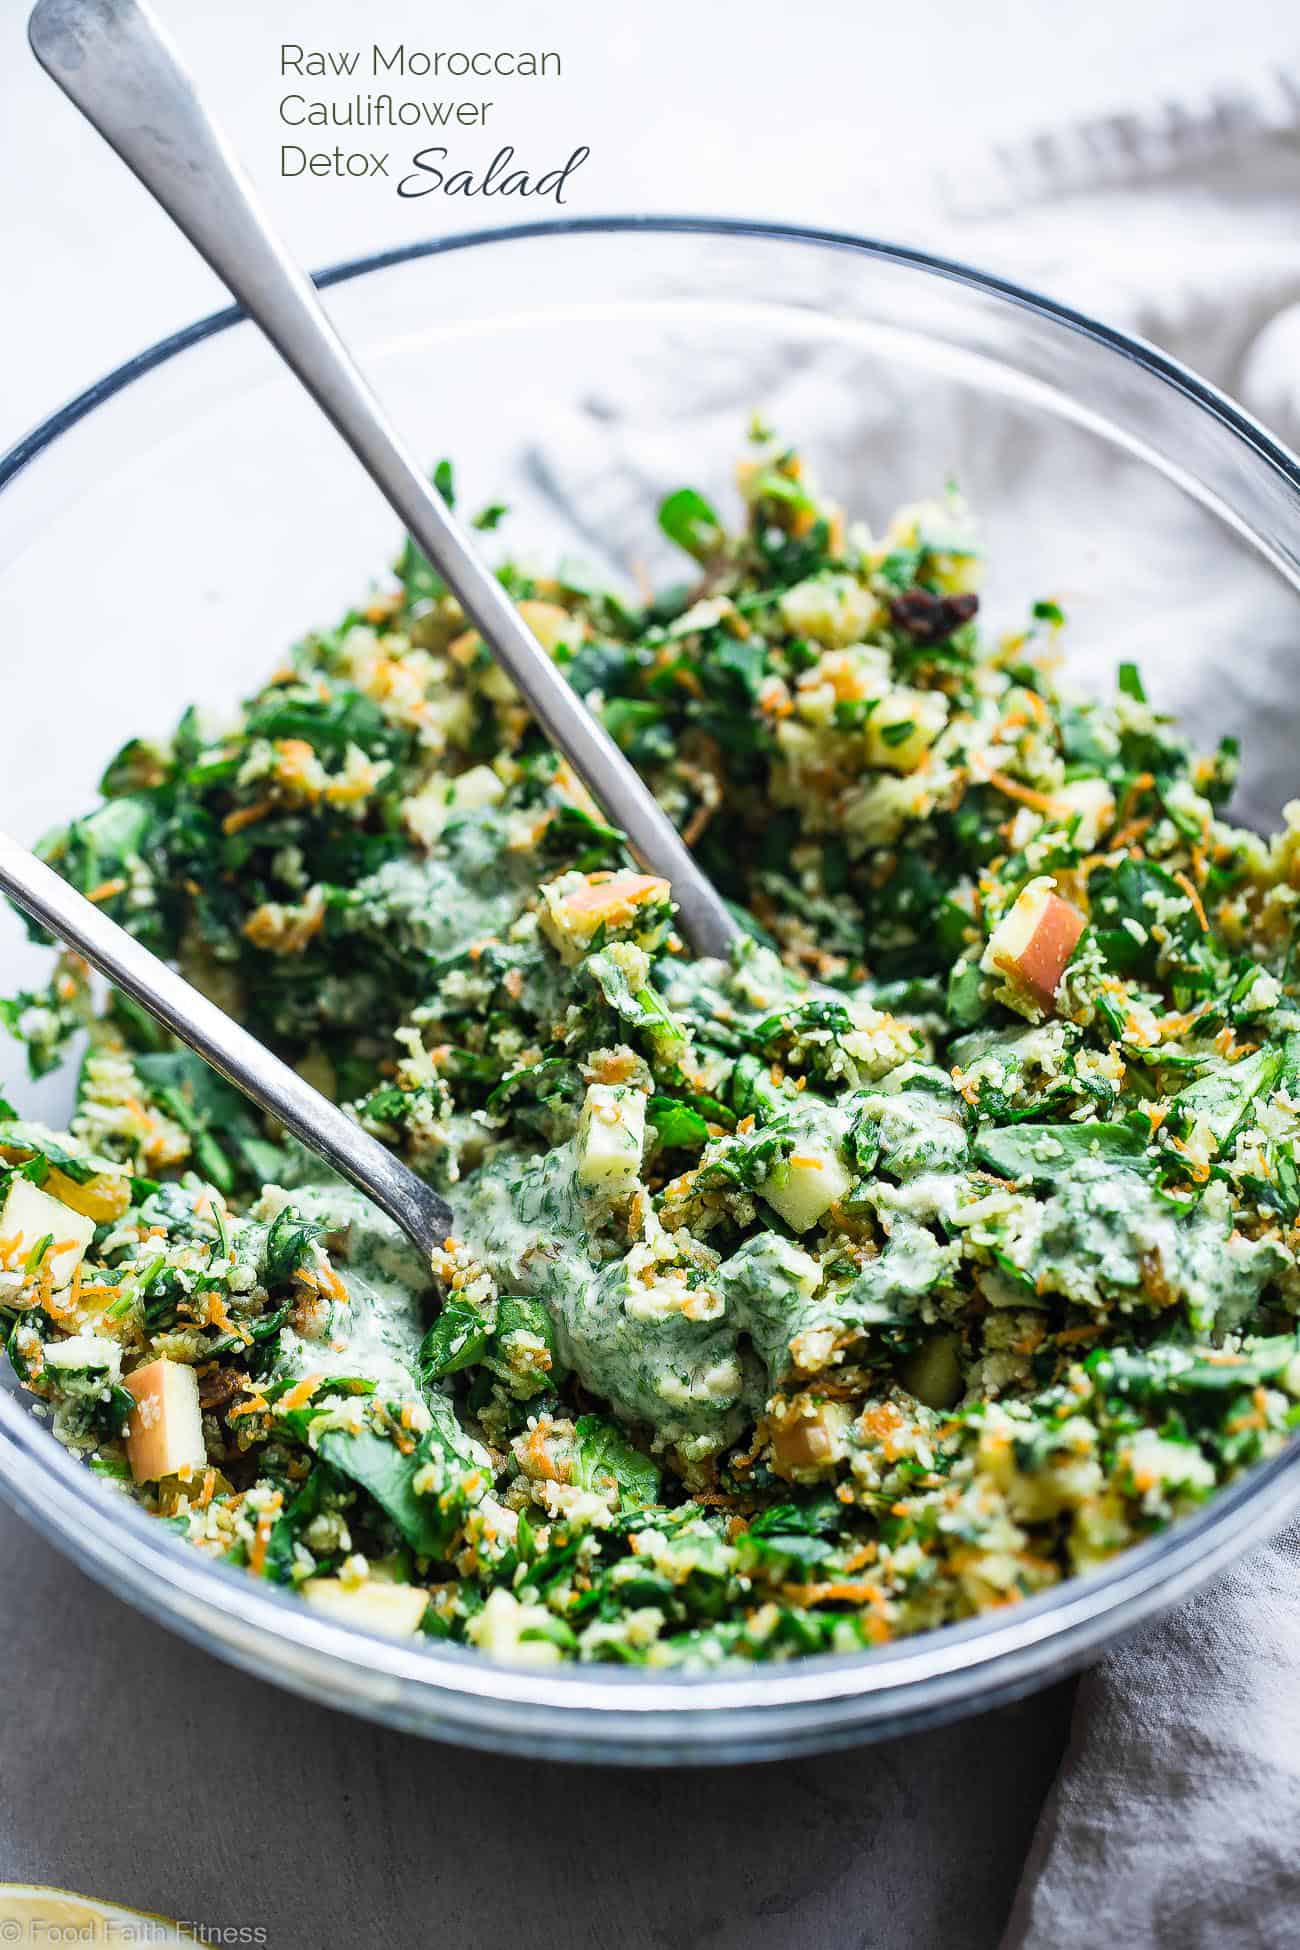 Moroccan Grated Raw Cauliflower Detox Salad - This veggie packed salad is a gluten/grain/dairy/sugar free salad with sweet and spicy, bold flavor! Paleo, vegan and whole30 compliant and perfect for meal prep! | Foodfaithfitness.com | @FoodfaithFit